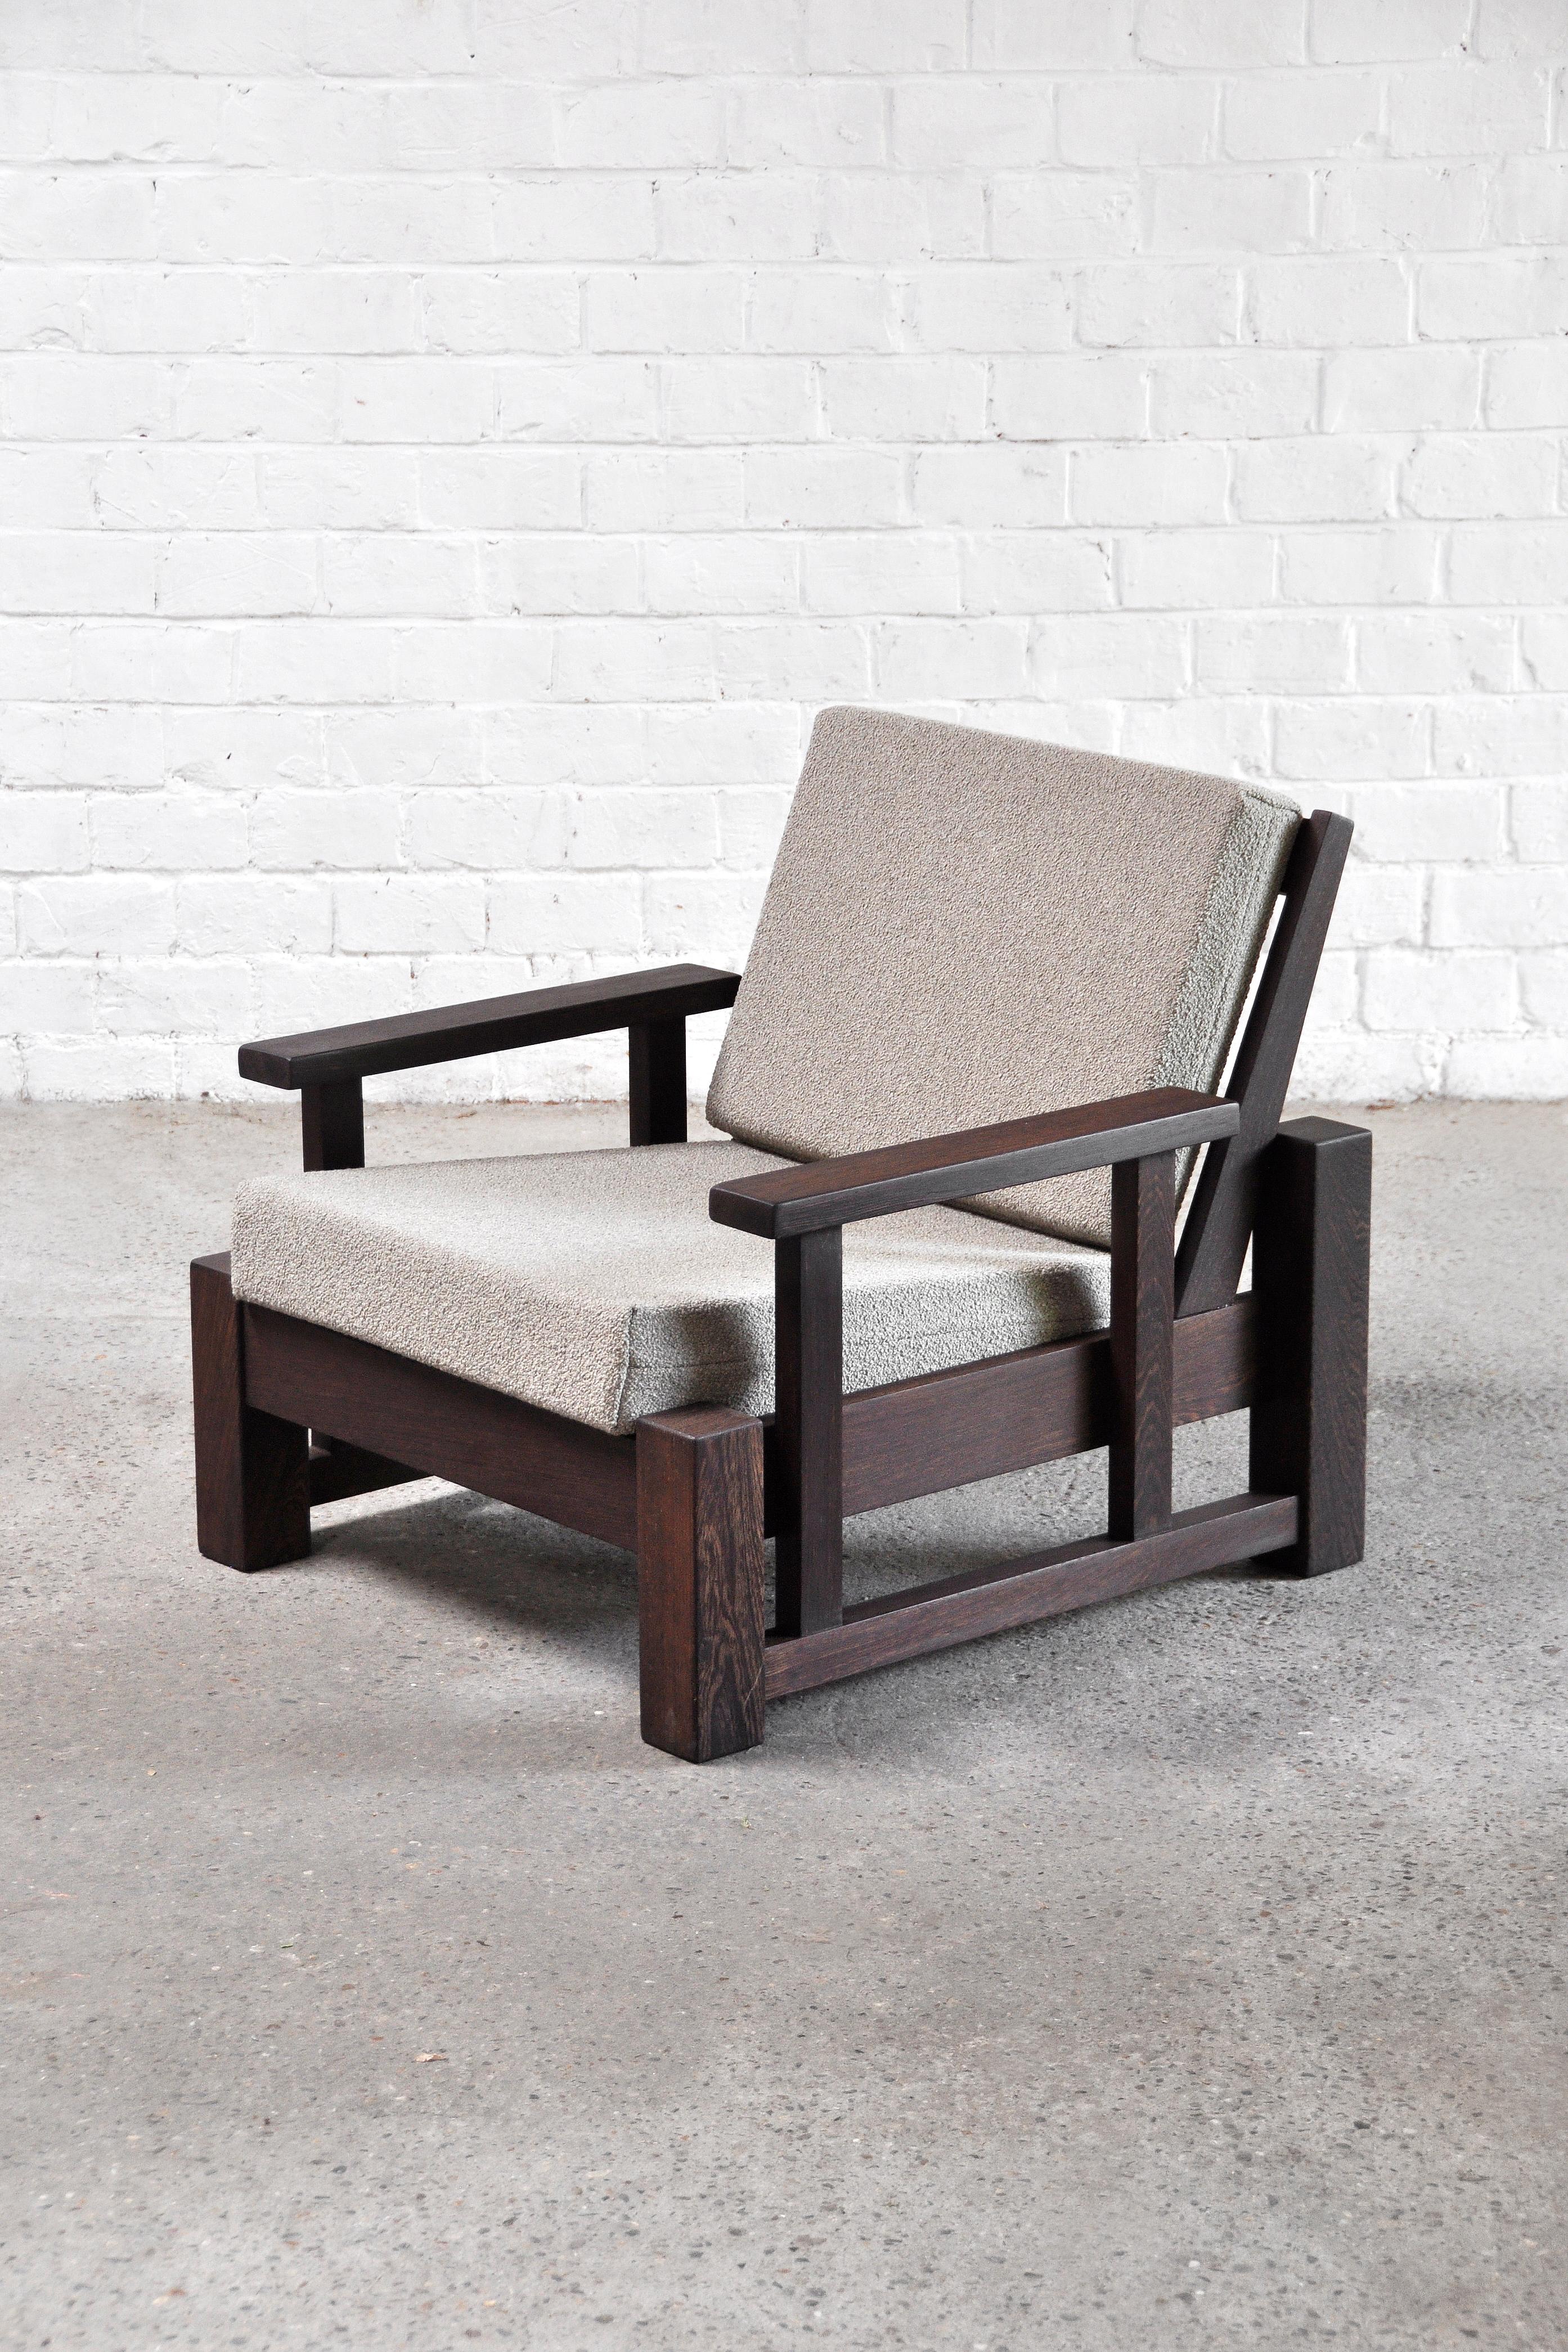 A constructivist/modernist armchair made of a solid wengé wooden frame, Netherlands 1960’s. The chair is finished with a re-upholstered taupe bouclé fabric. Thanks to the use of geometrical design elements, a boxy and strong look is created while